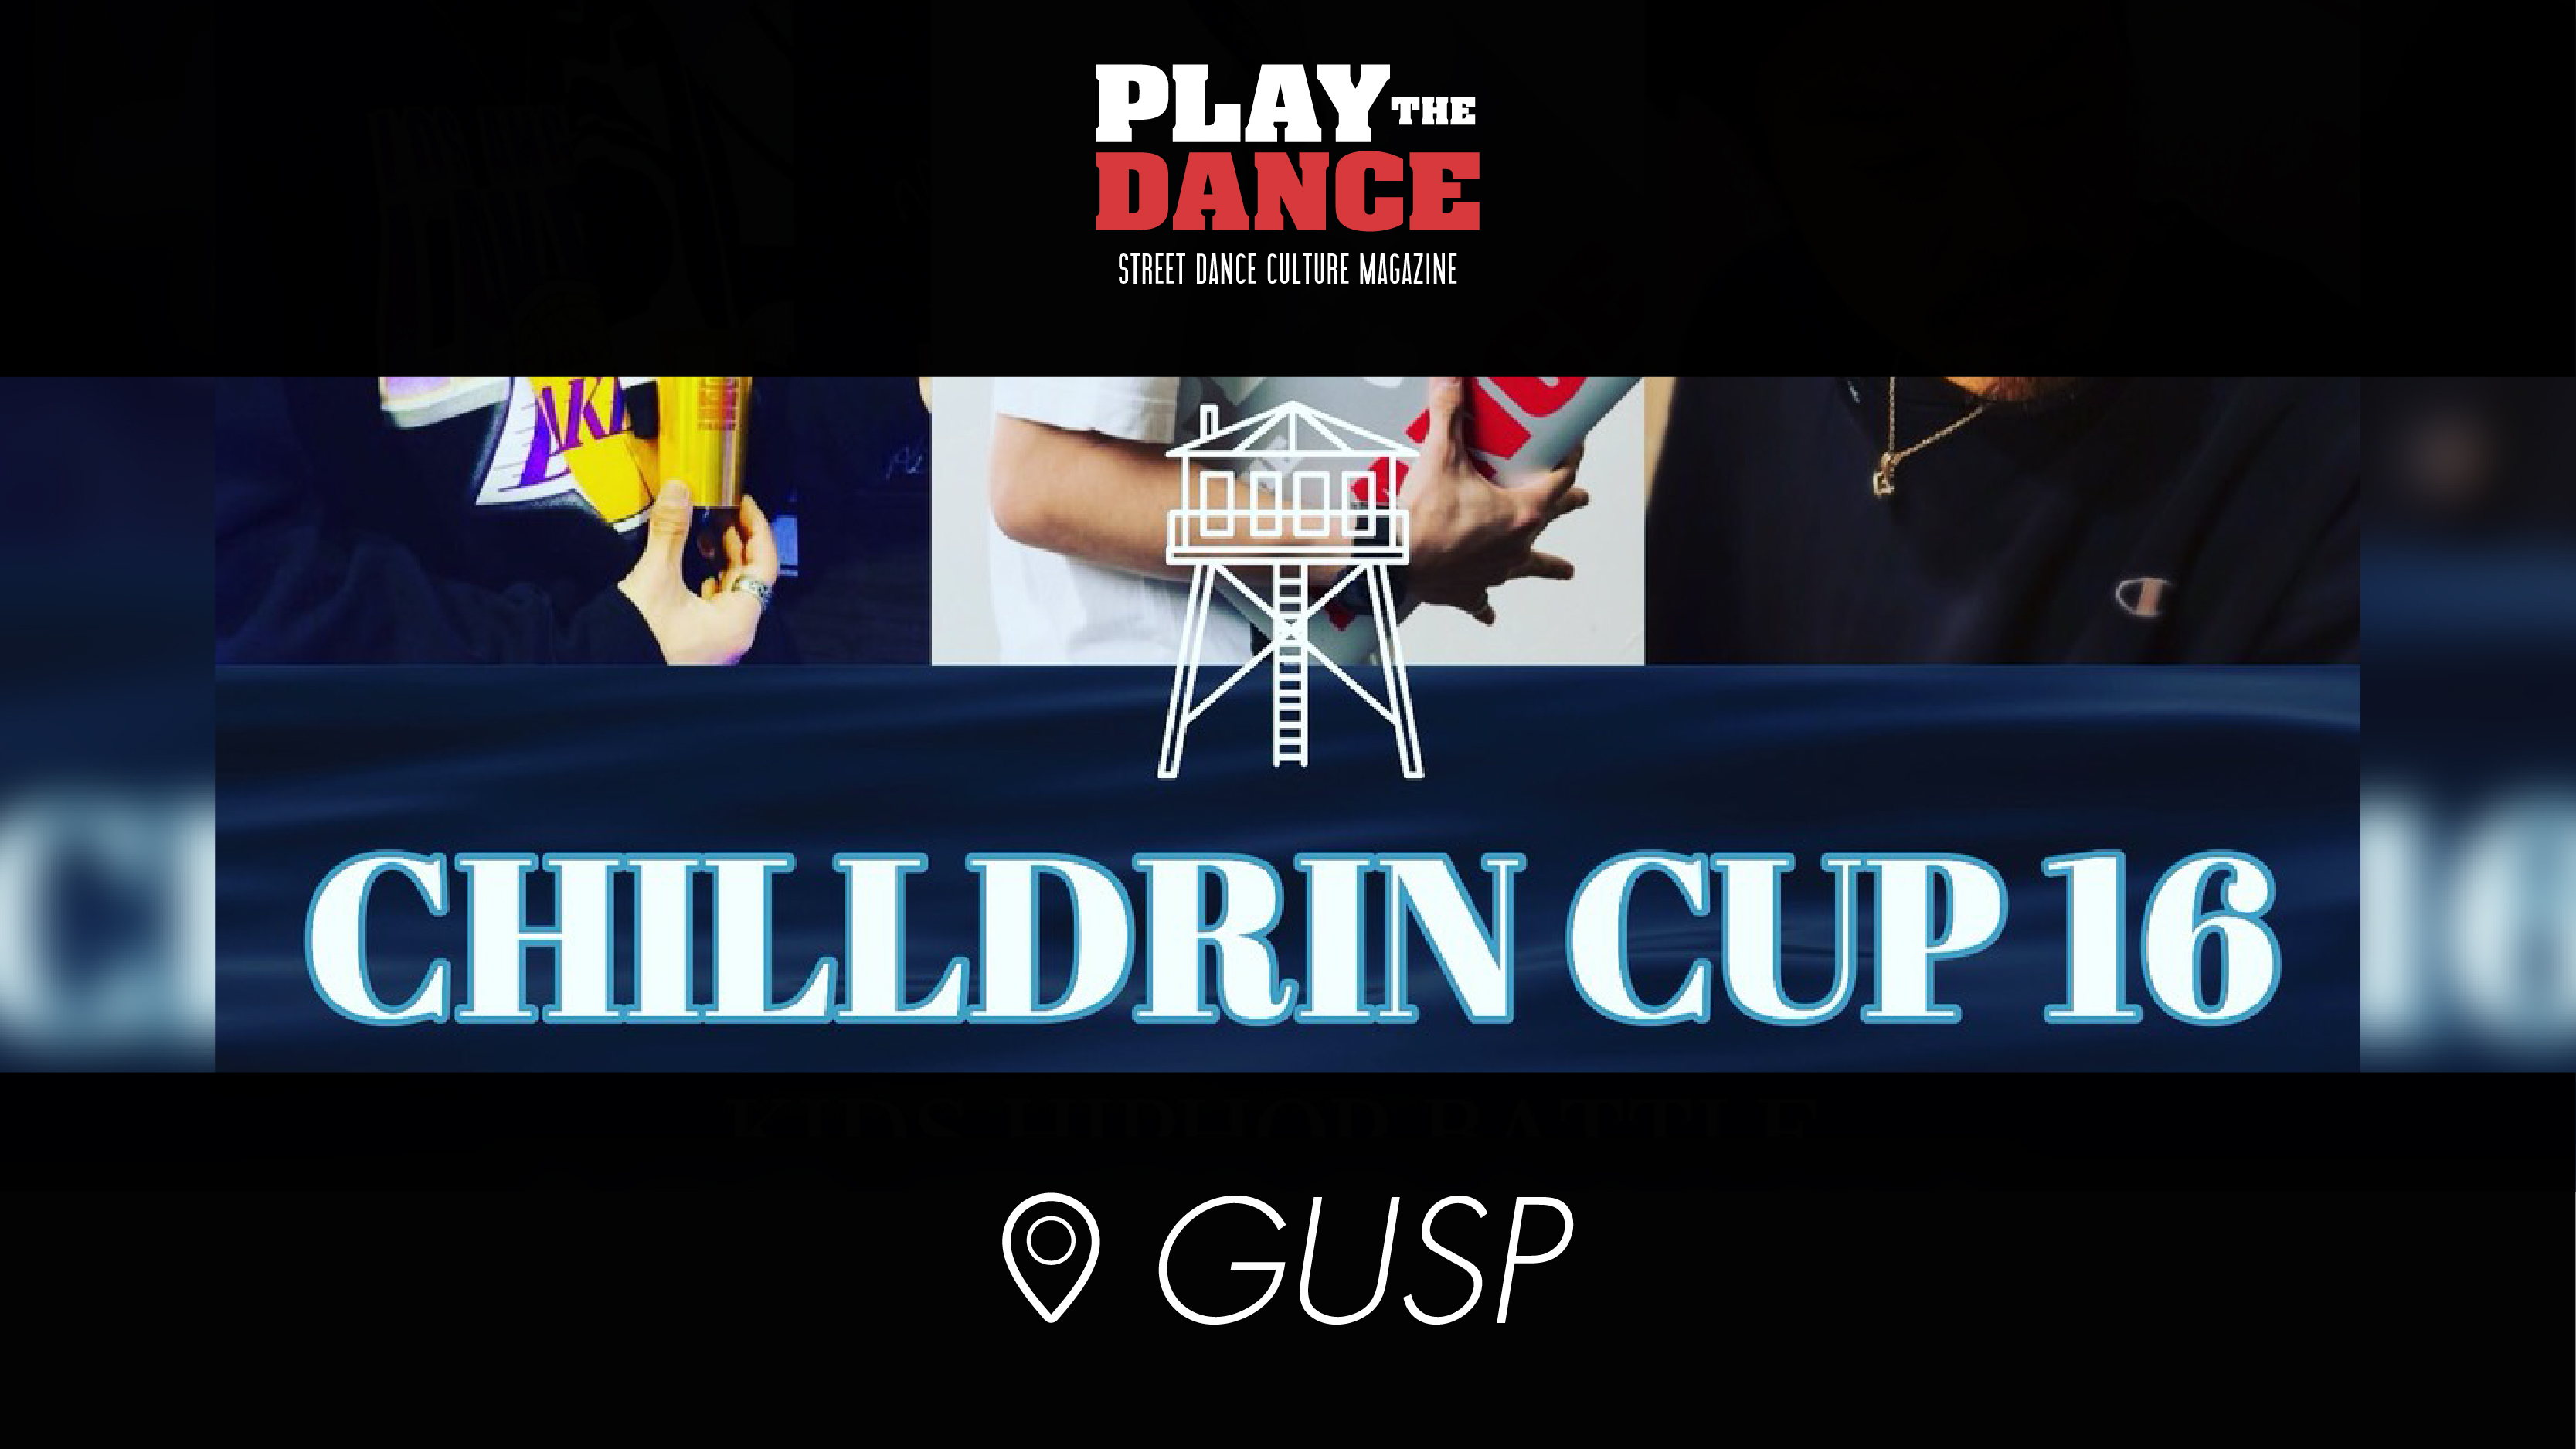 CHILLDRIN CUP 16